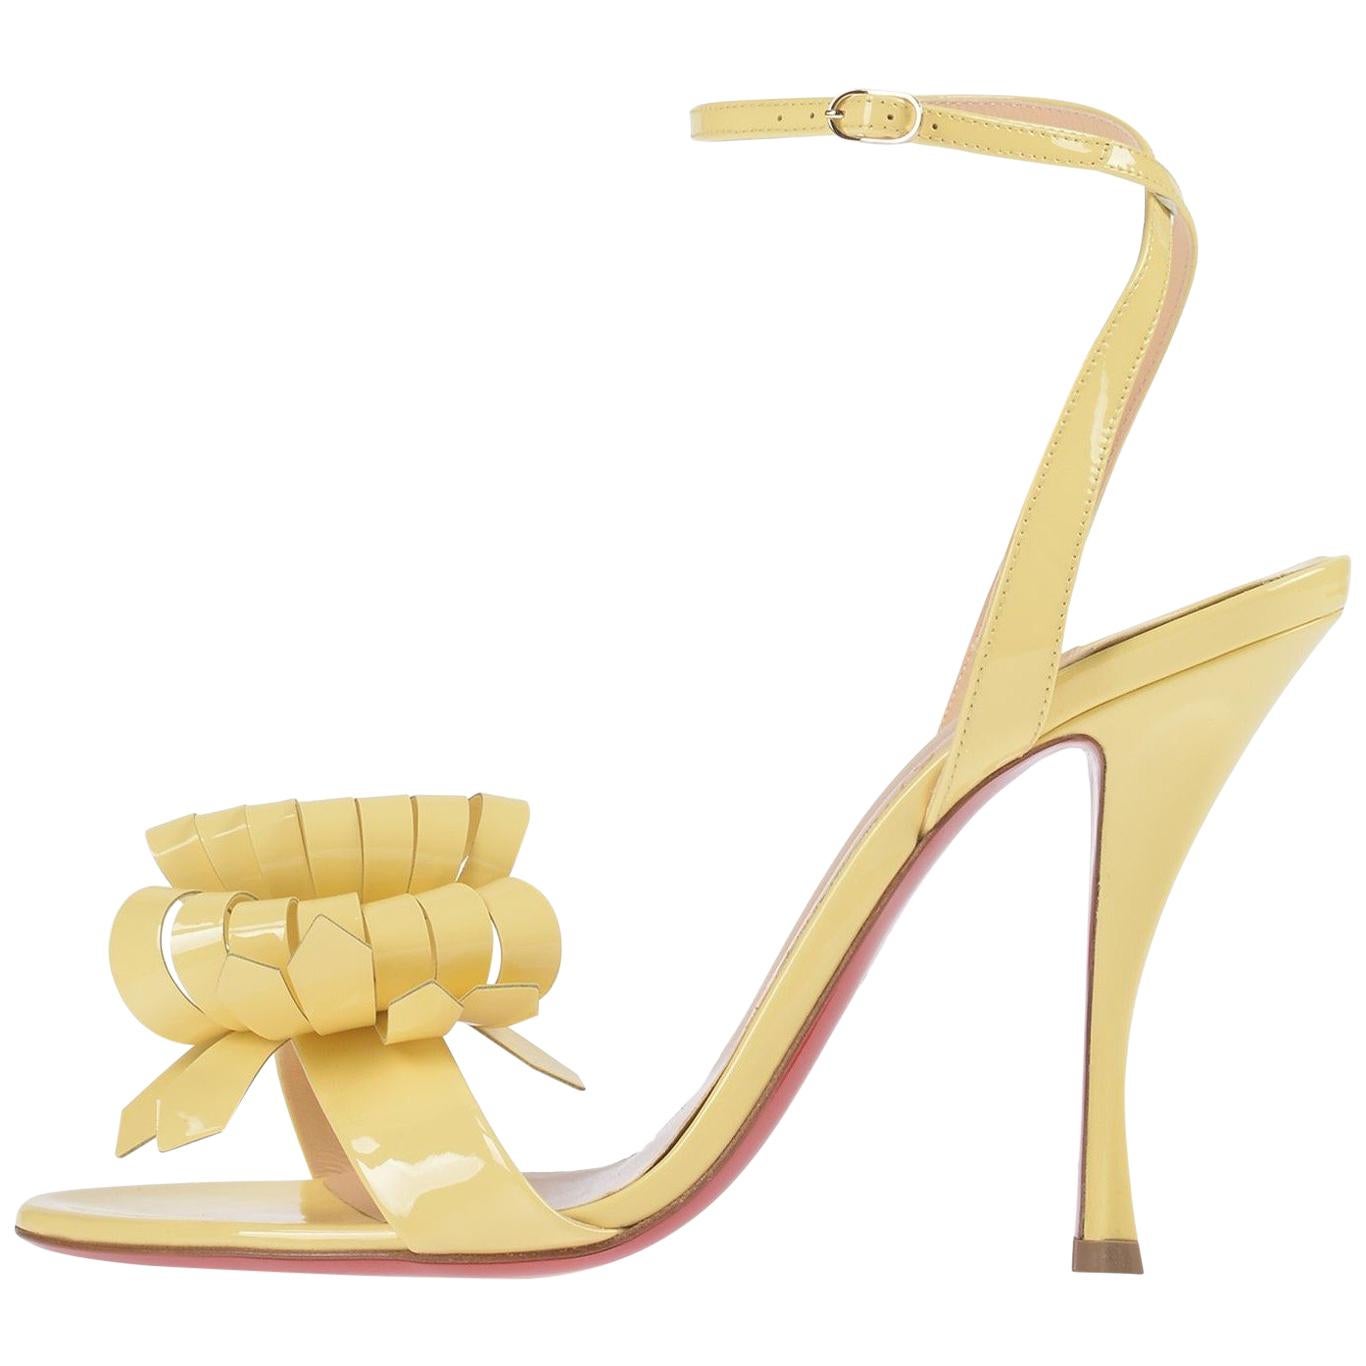 Christian Louboutin NEW Yellow Patent Bow Evening Sandals Heels in Box